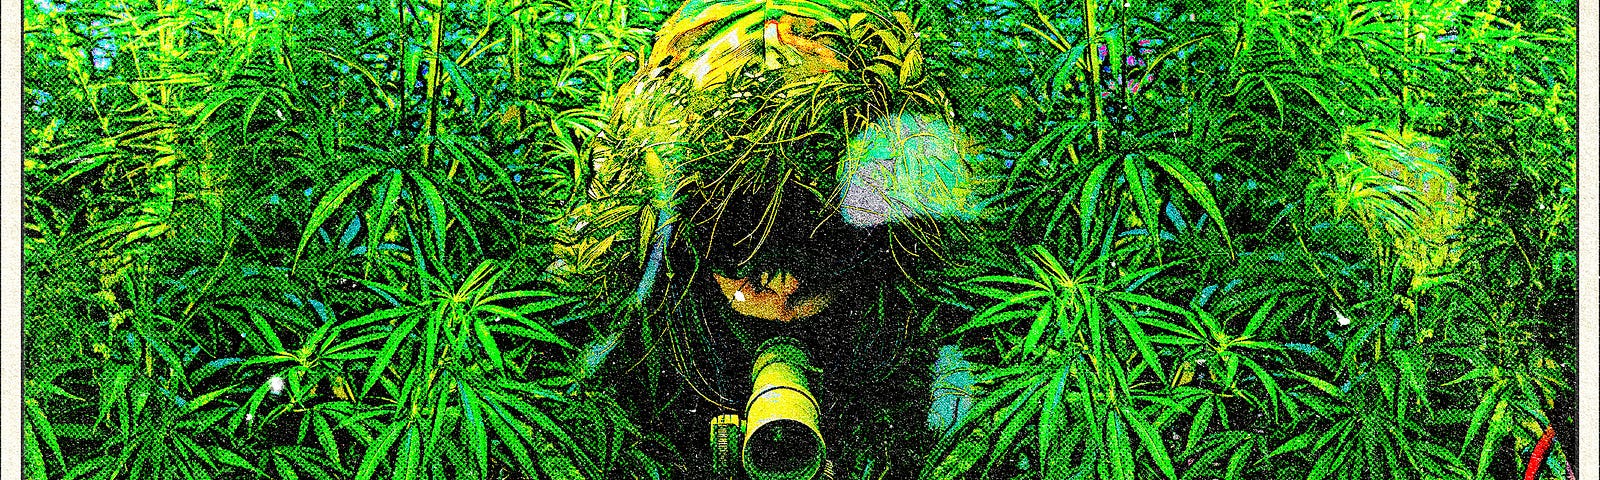 Weed sniper lurking in weed fields